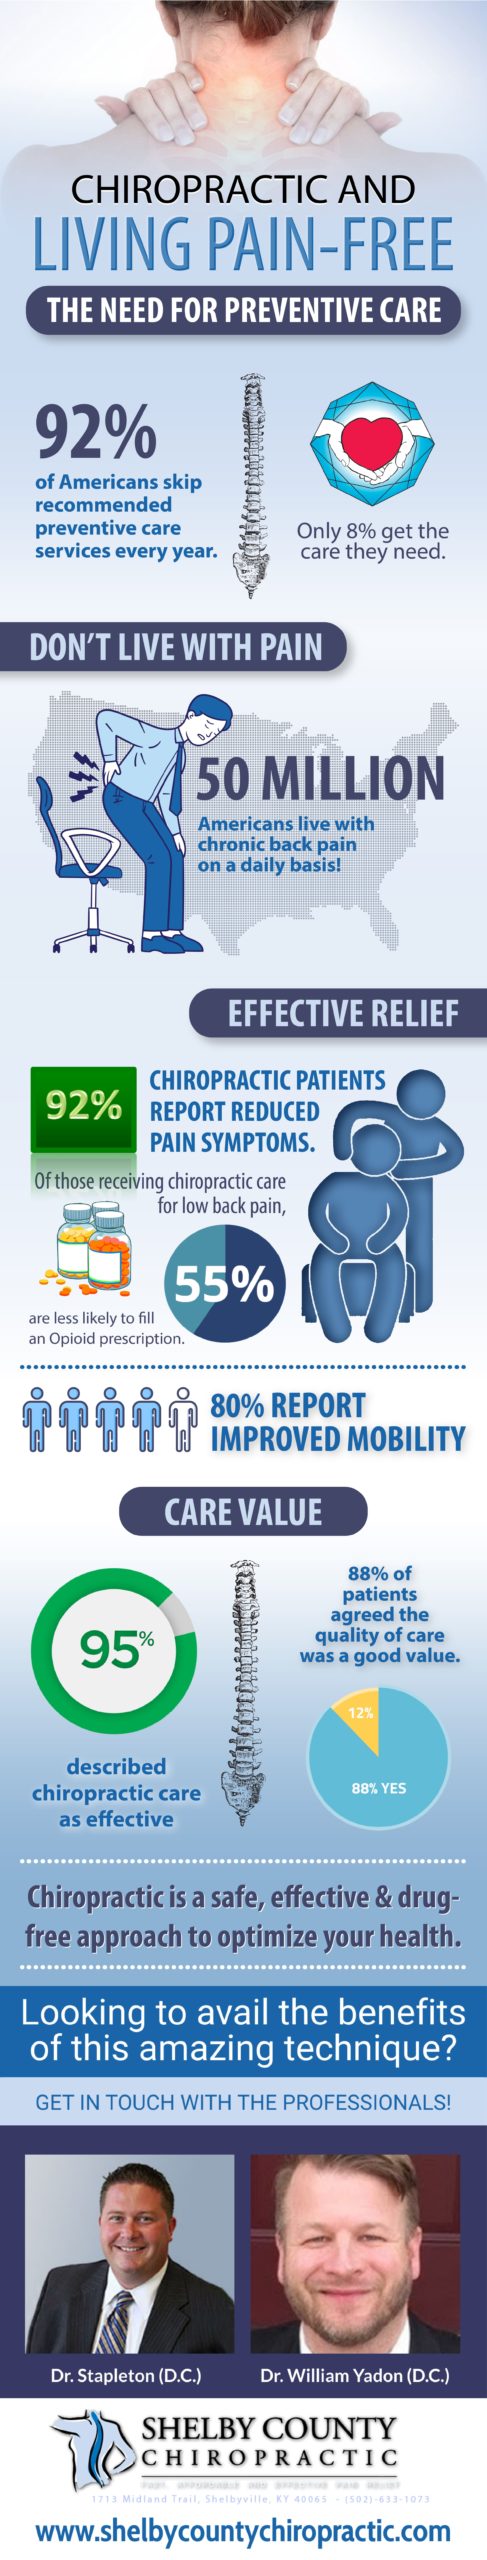 Chiropractic-and-living-pain-free